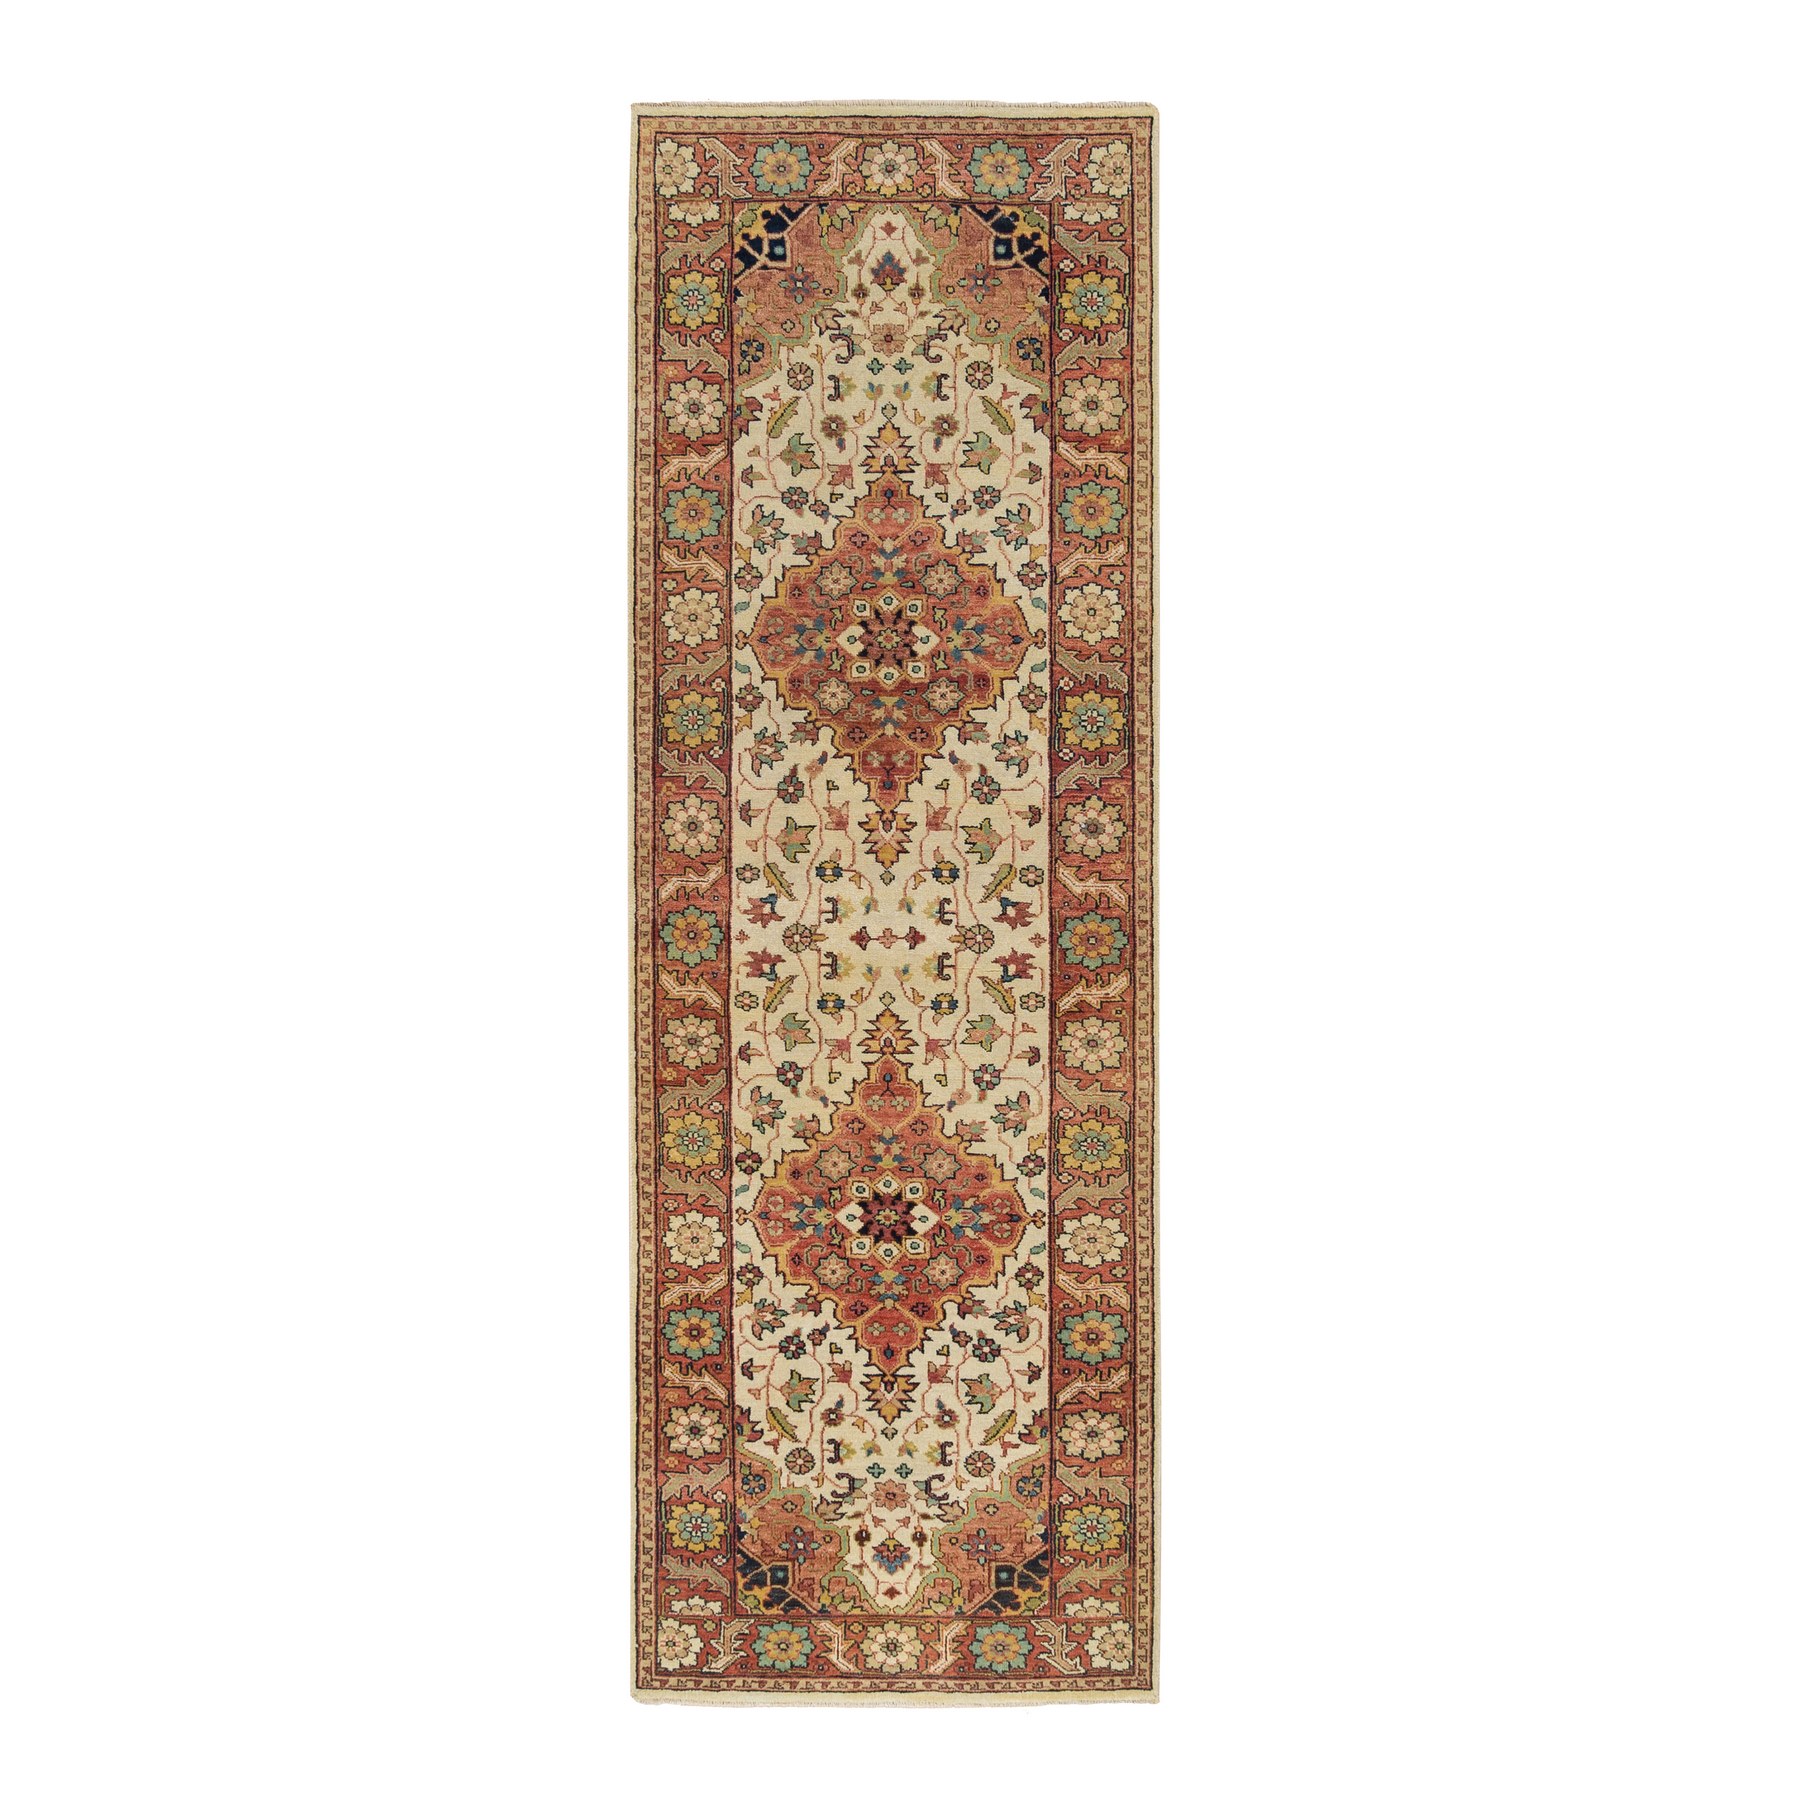  Wool Hand-Knotted Area Rug 2'6